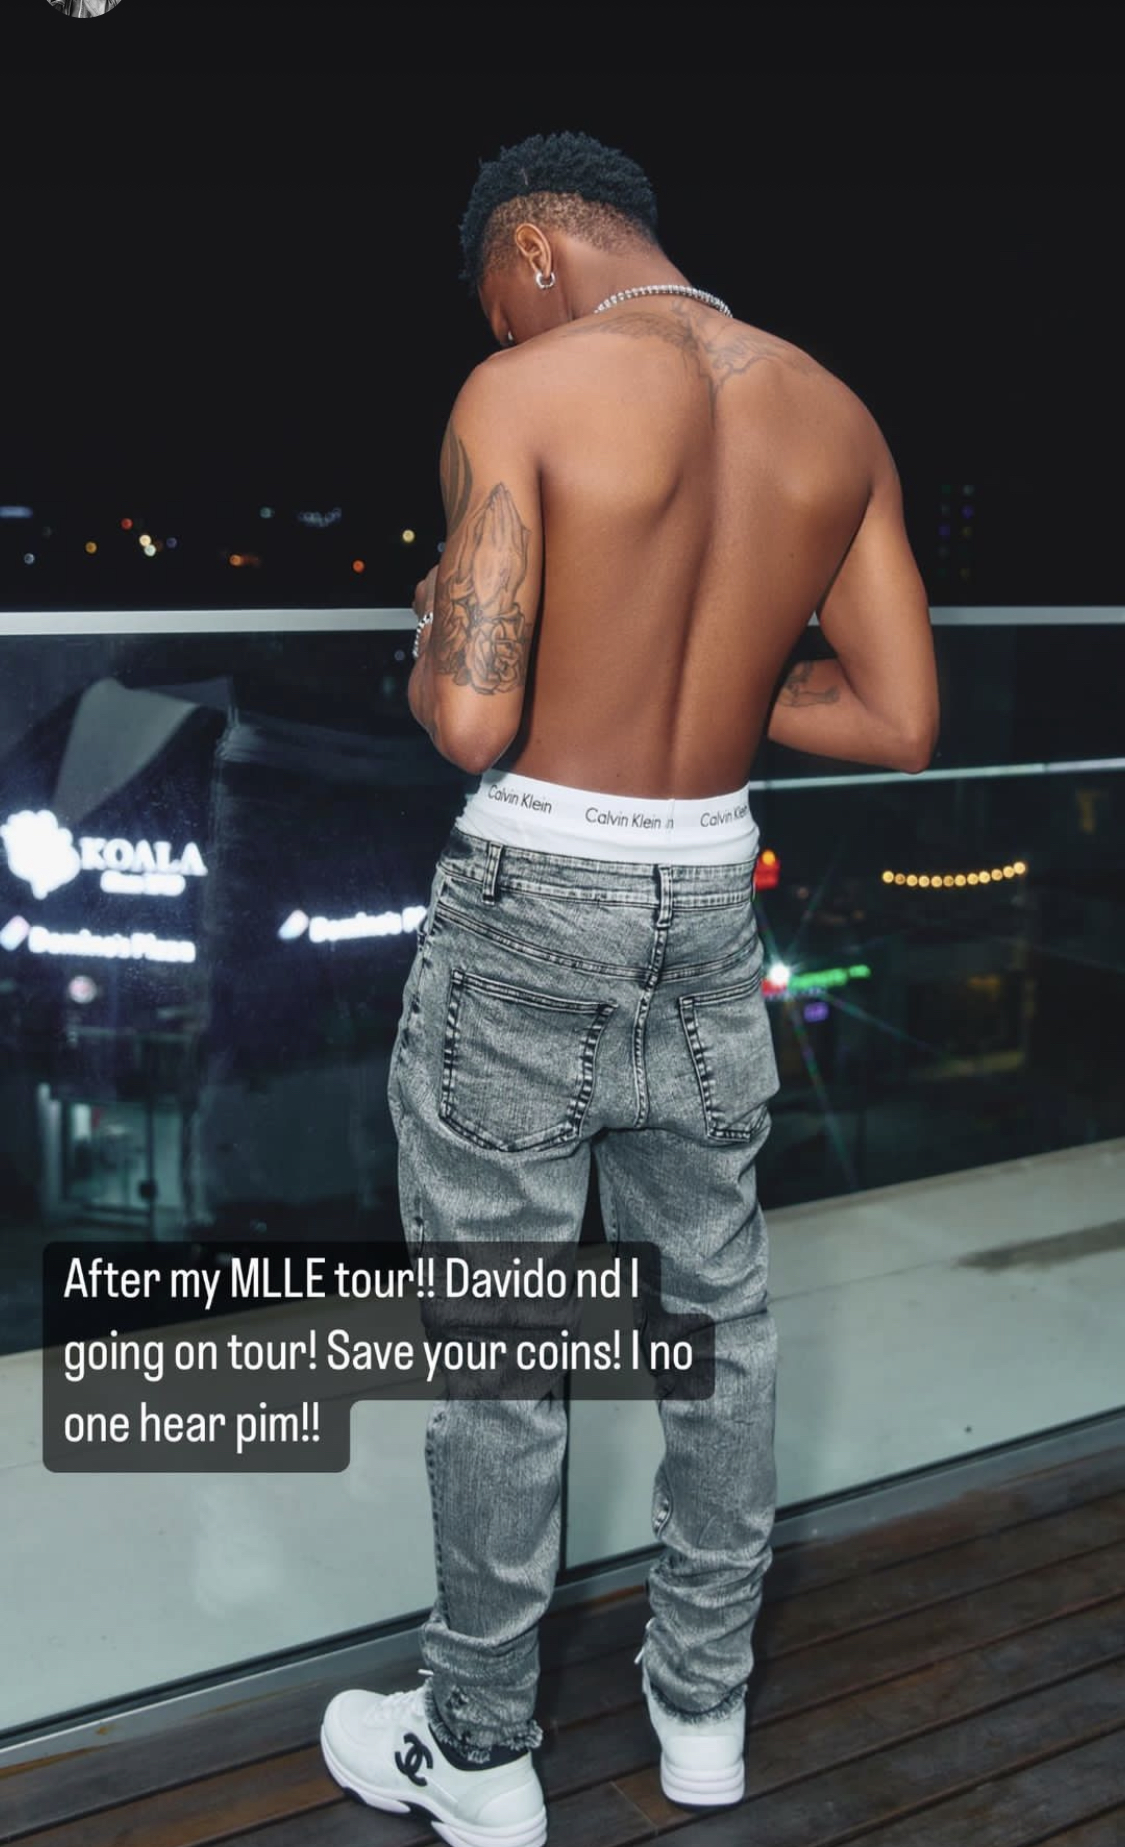 Davido and I are going on tour - Musician Wizkid Announces